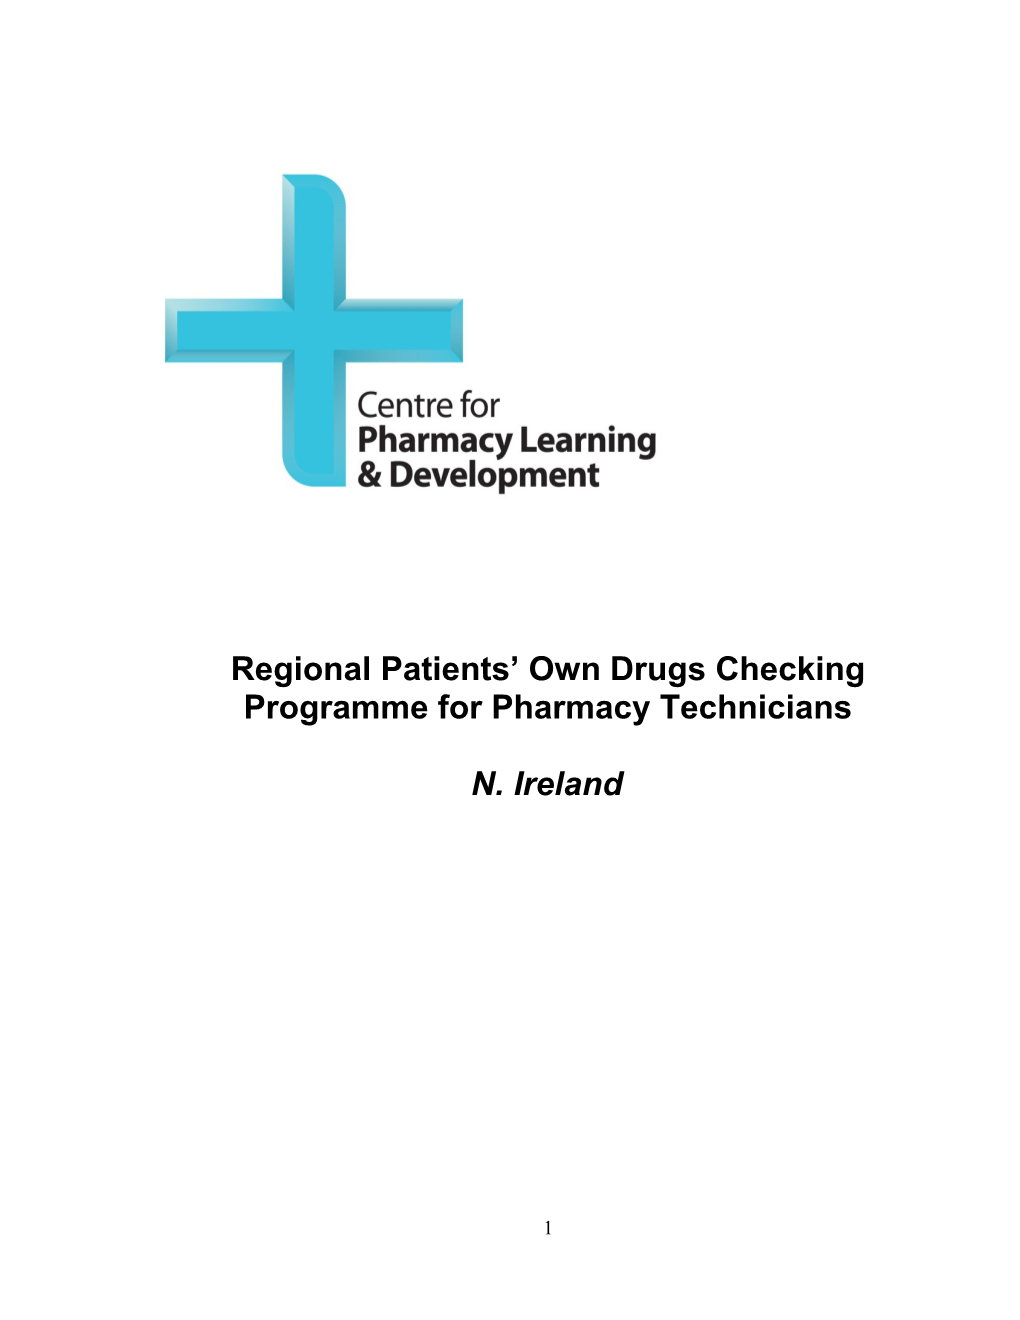 Regional Patients Own Drugs Checking Programme for Pharmacy Technicians